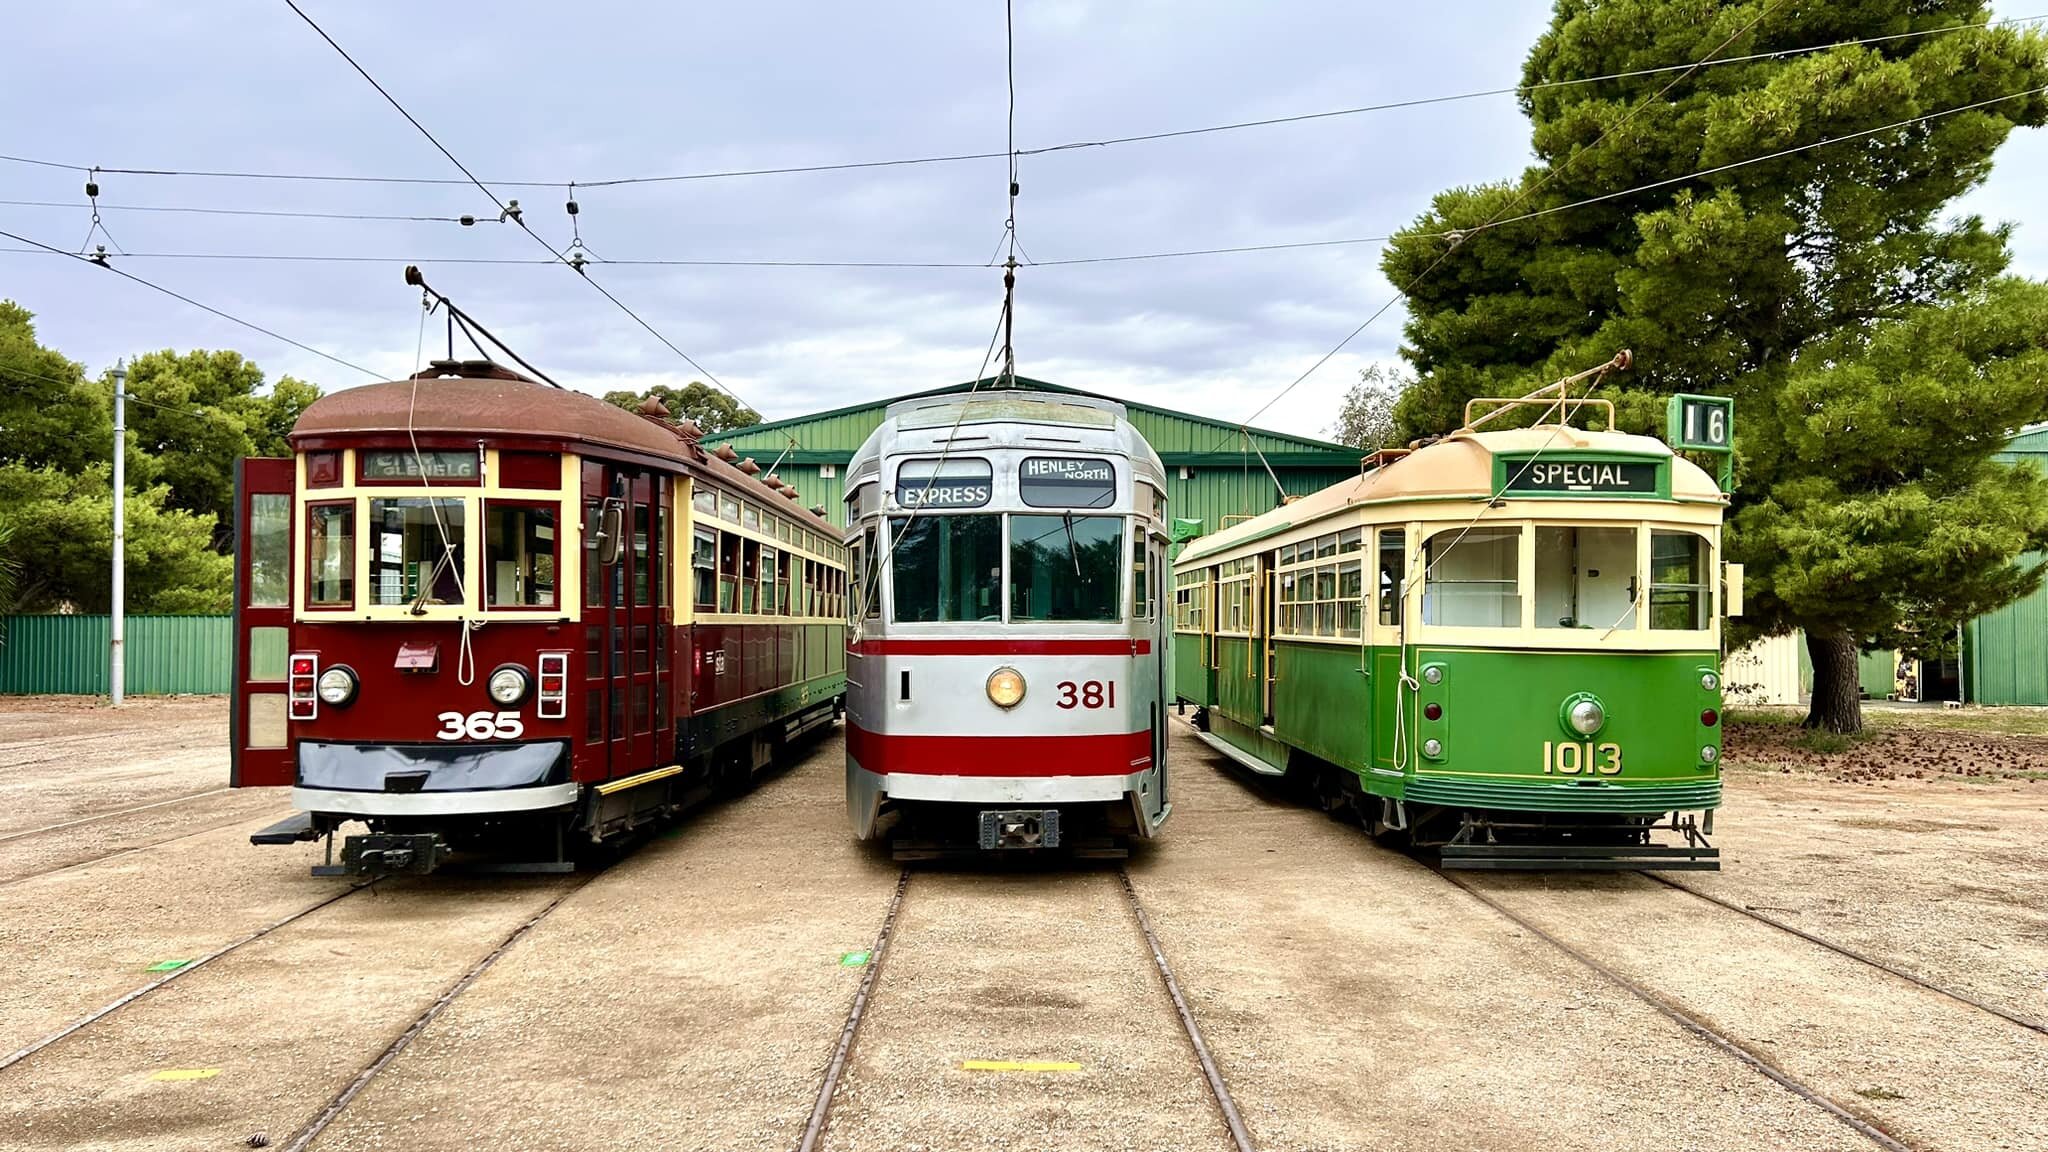 The weather may be a little overcast, but that doesn&rsquo;t bother these three trams.
Come along today to enjoy a ride inside a nice dry tram, we&rsquo;re open 12pm to 5pm.